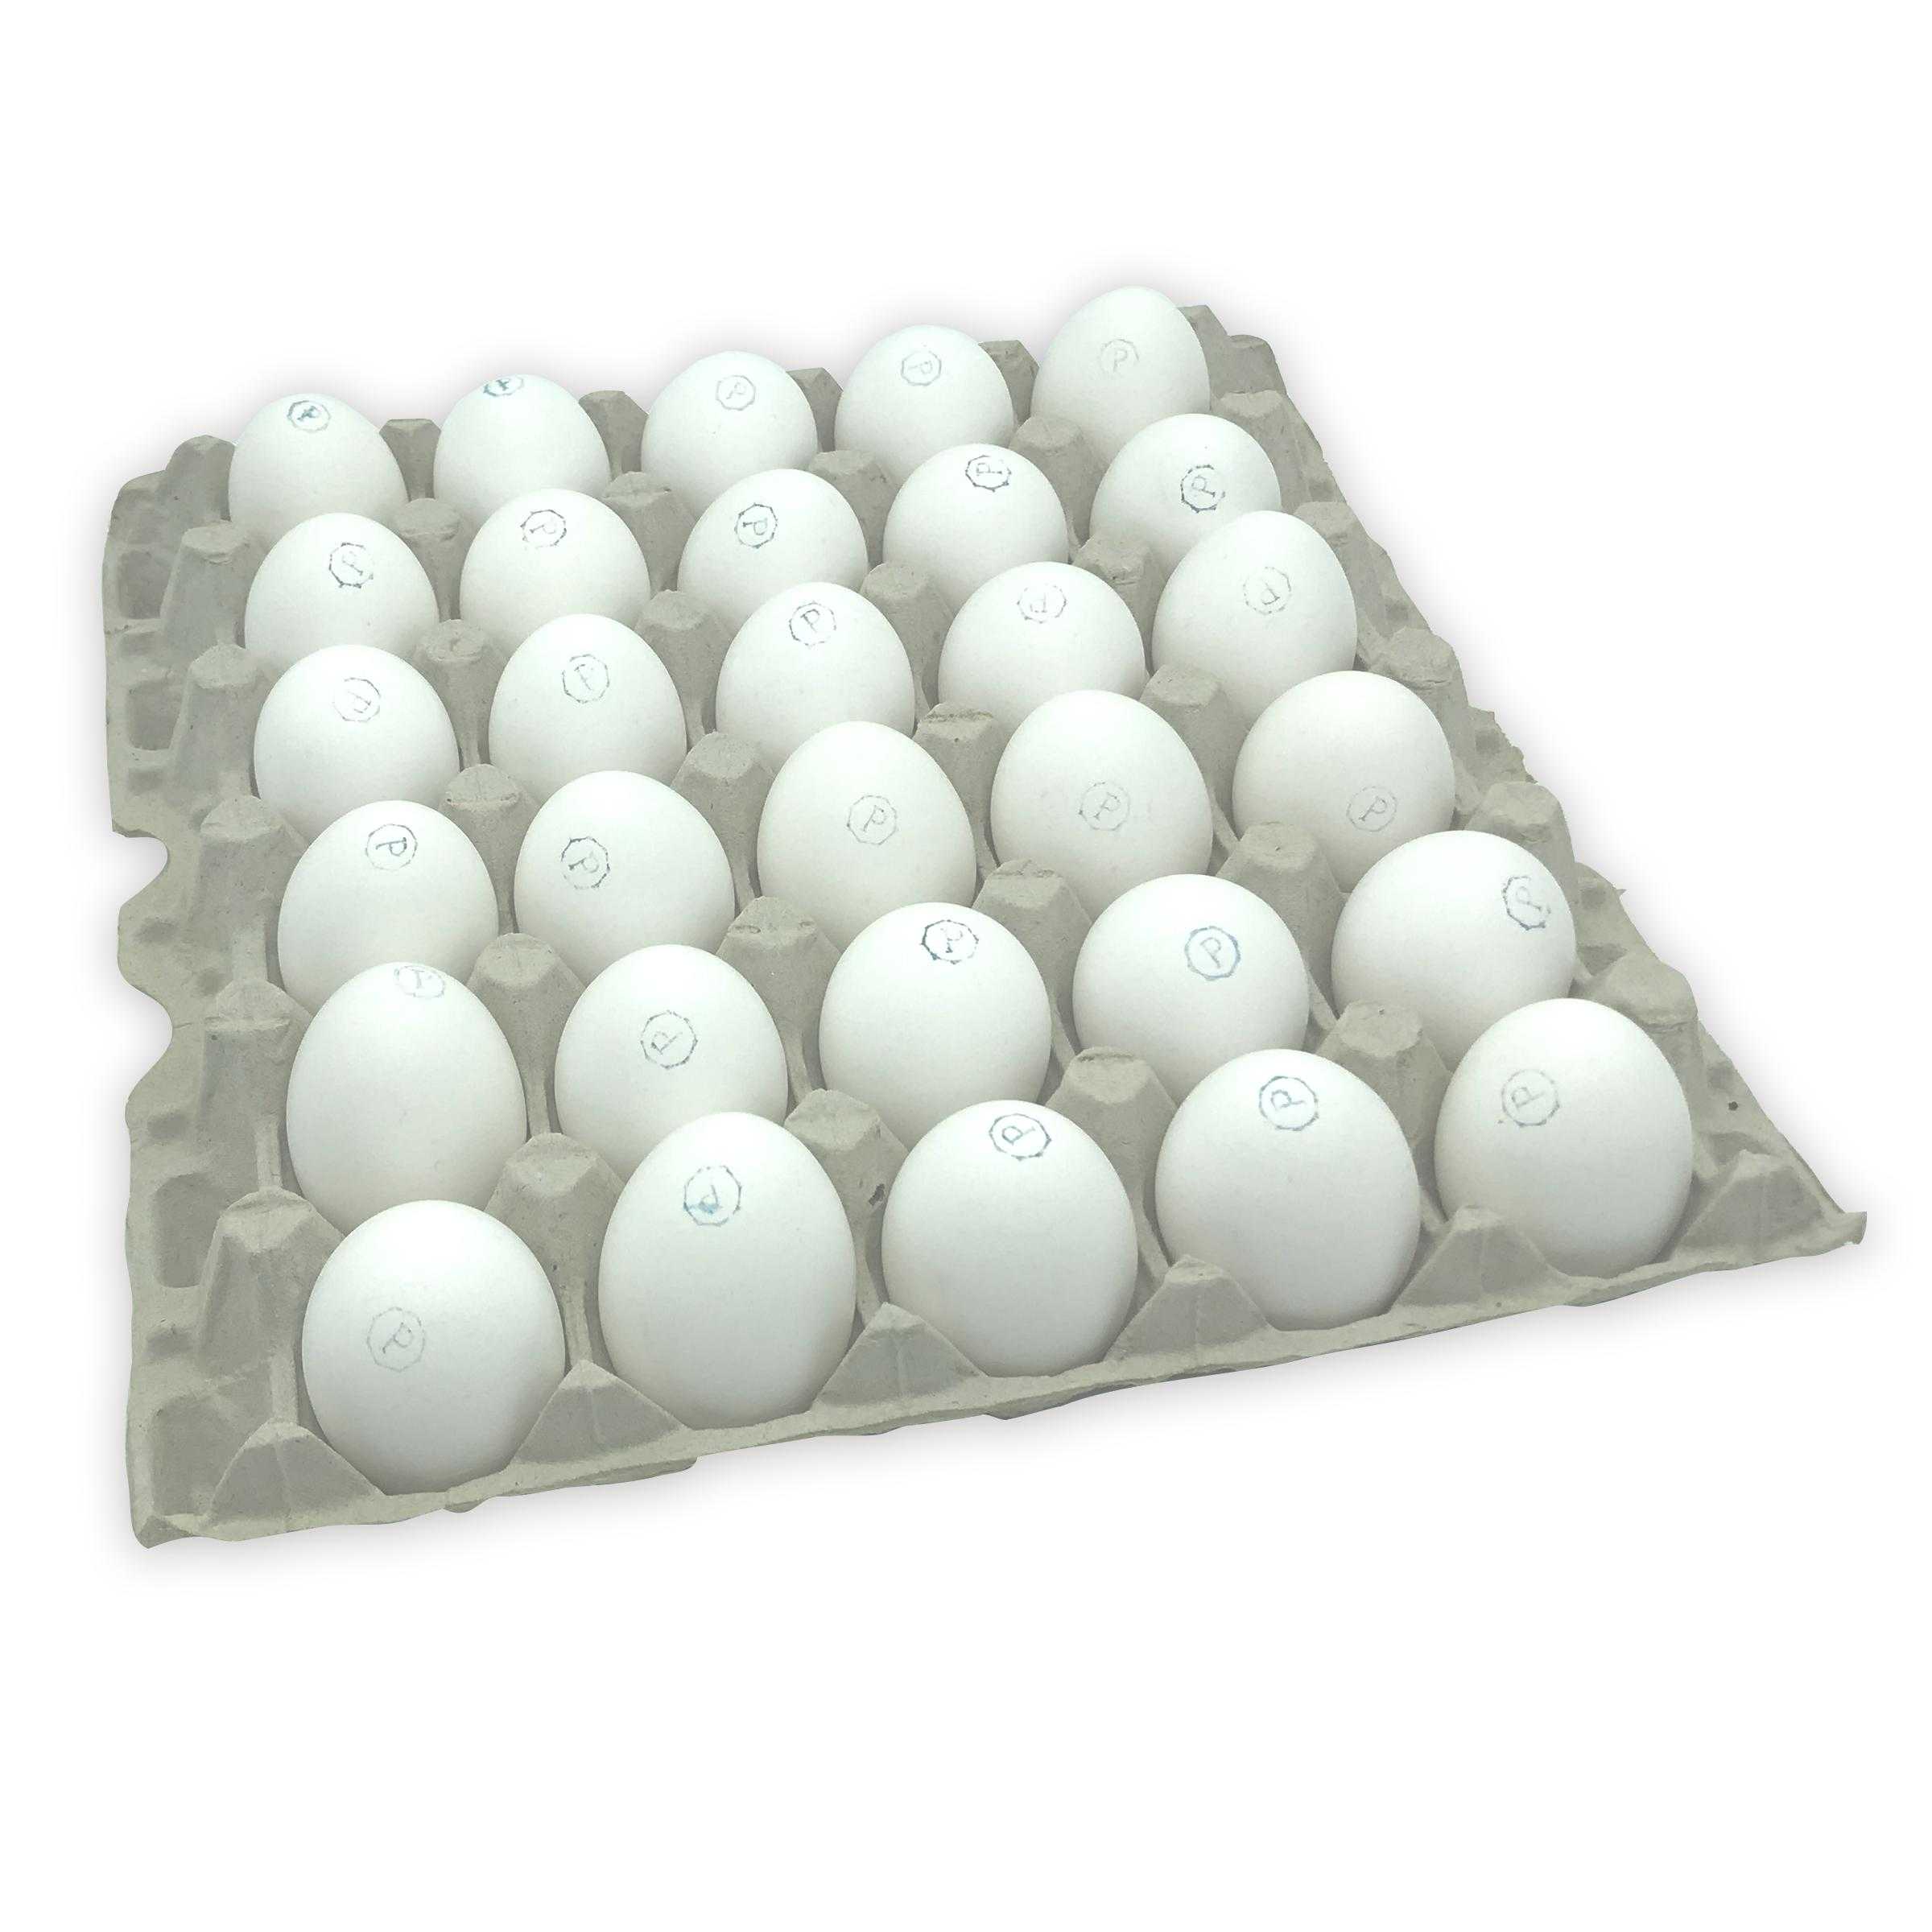 Abbotsford Farms® American Humane Certified Cage Free Large Pasteurized Shell Eggs, Graded, Loose Pack, 1/15 Dozen Case